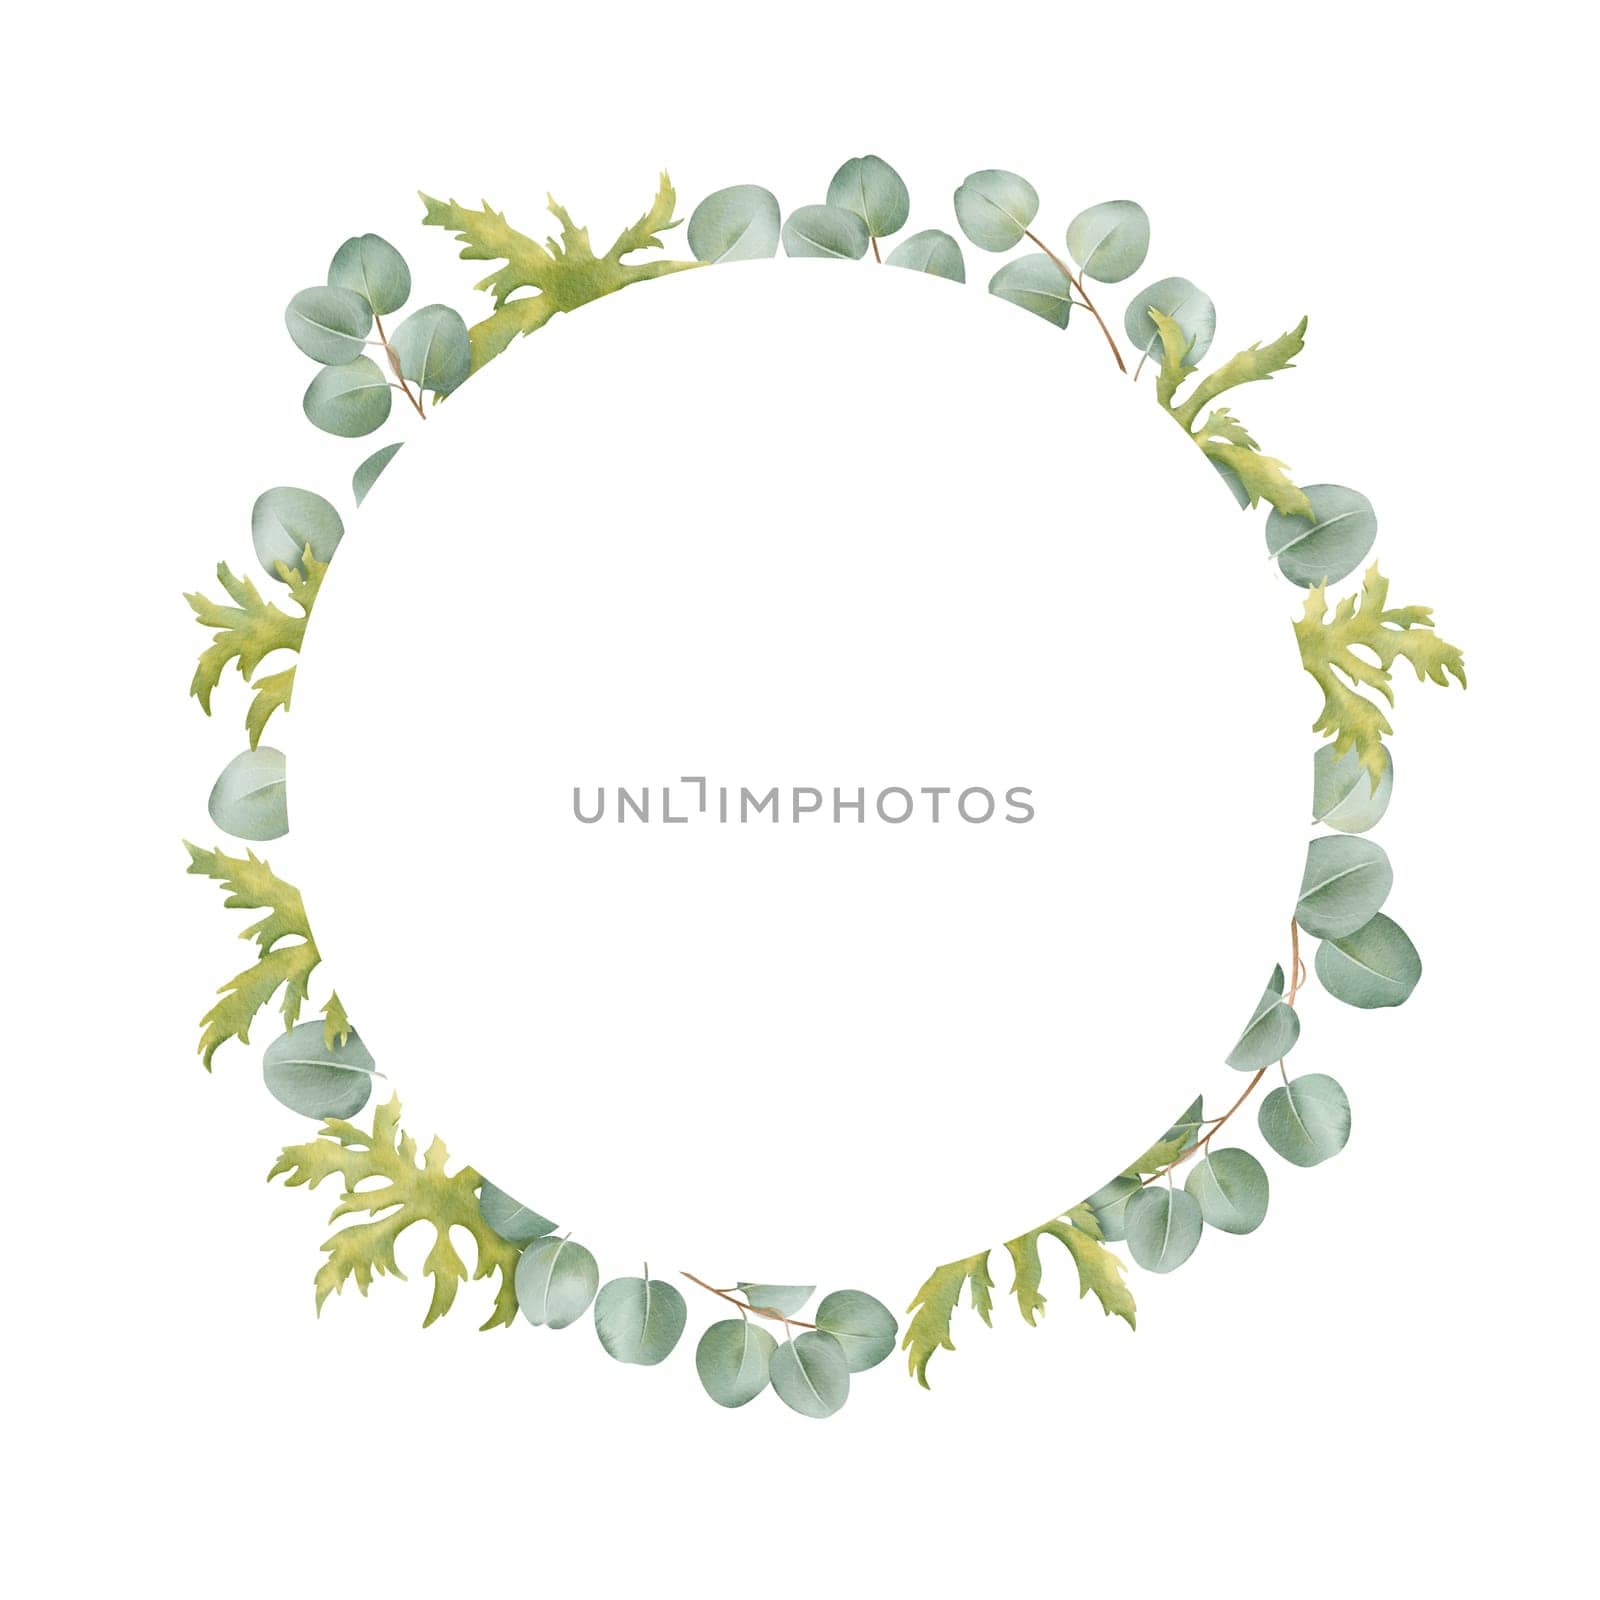 A minimalist circular frame composed of anemone leaves and eucalyptus branches. for invitations, greeting cards, posters, and social media graphics, adding an elegant touch to any project by Art_Mari_Ka